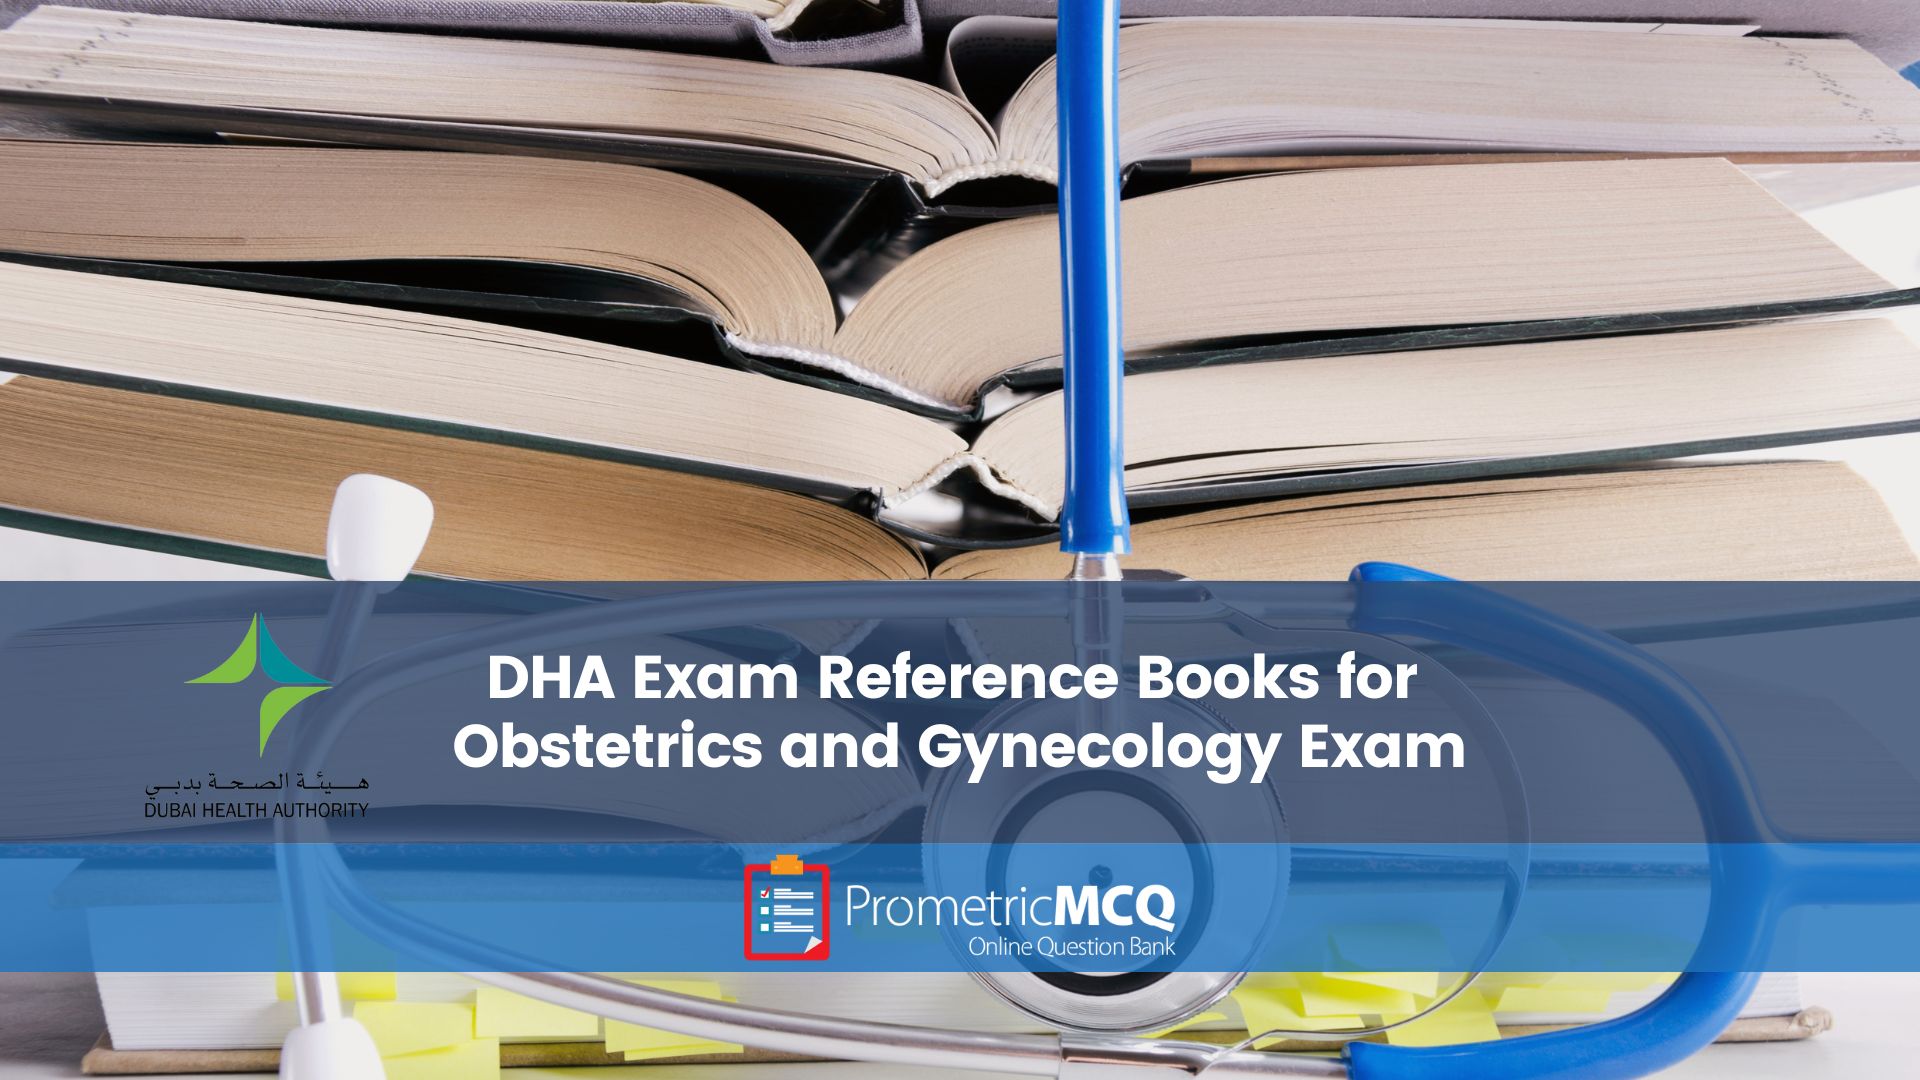 DHA Books for Obstetrics and Gynecology